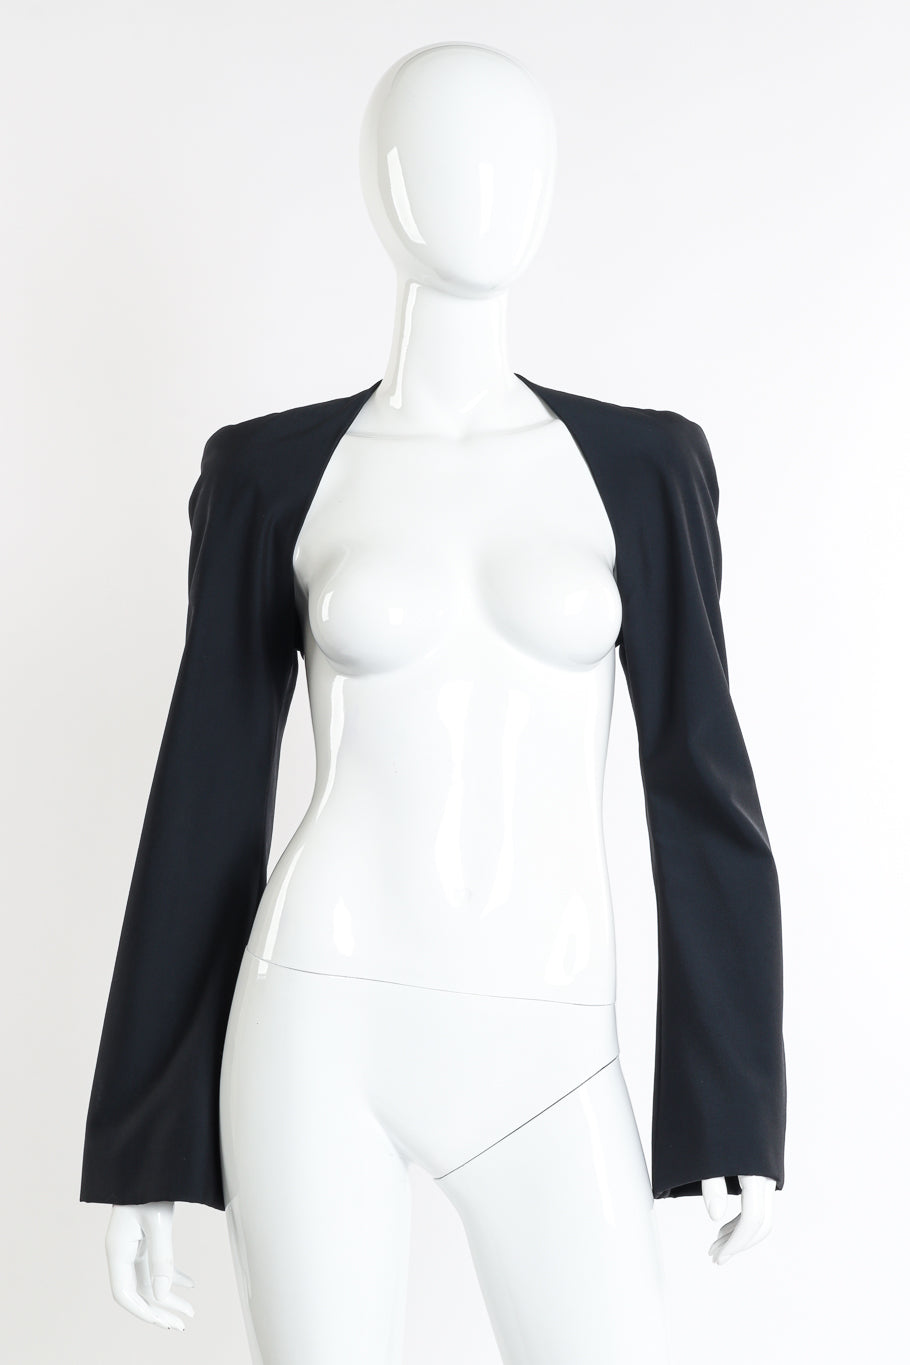 Givenchy Couture Bell Sleeve Bolero front on mannequin @recessla